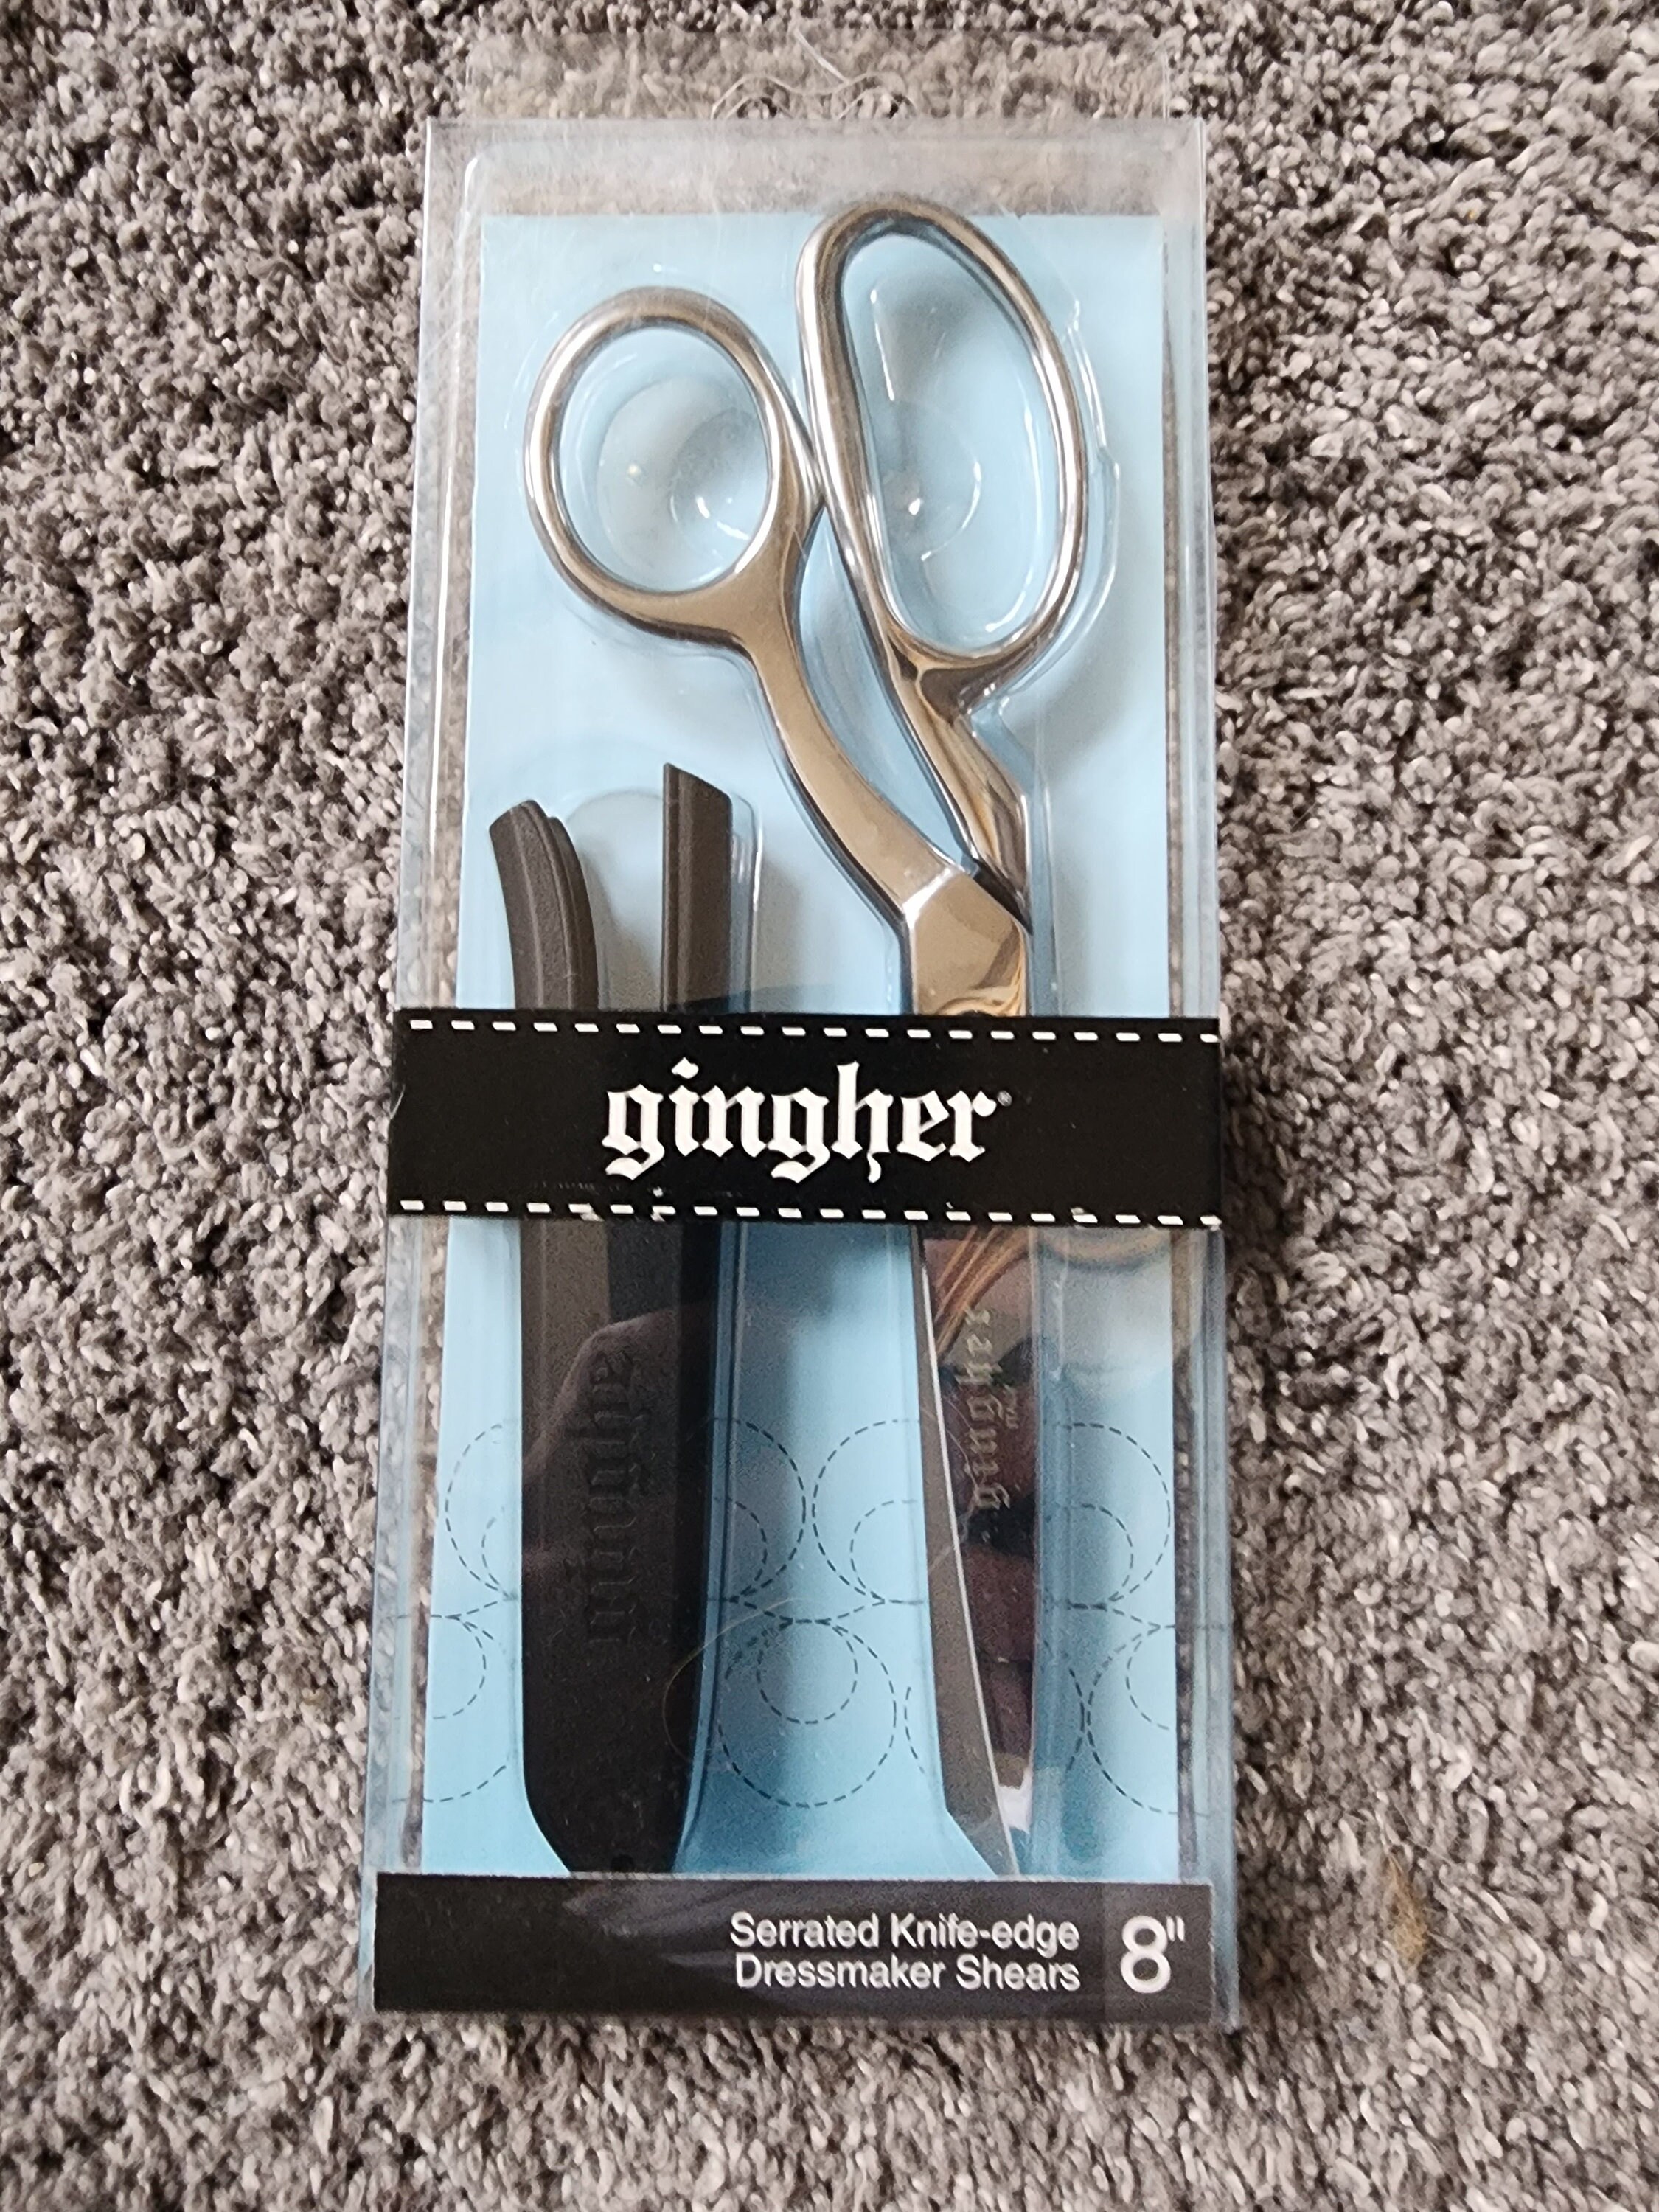 Gingher 7 Inch Knife-Edge Dressmaker Shears - 1000's of Parts